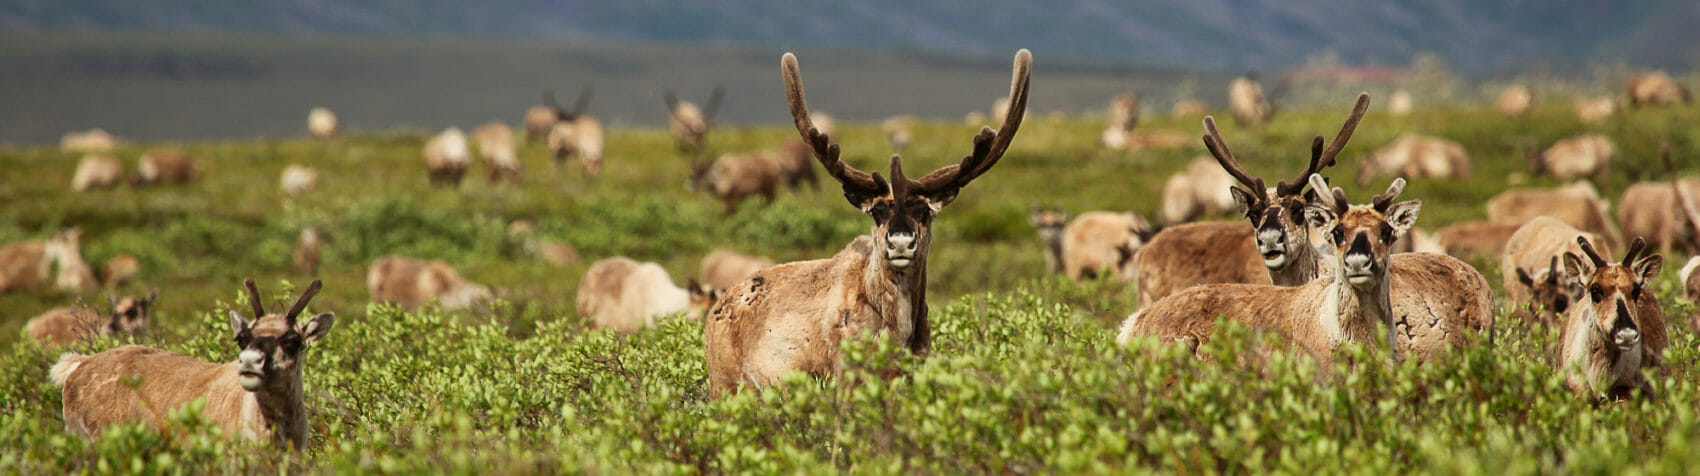 caribou in the arctic national wildlife refuge